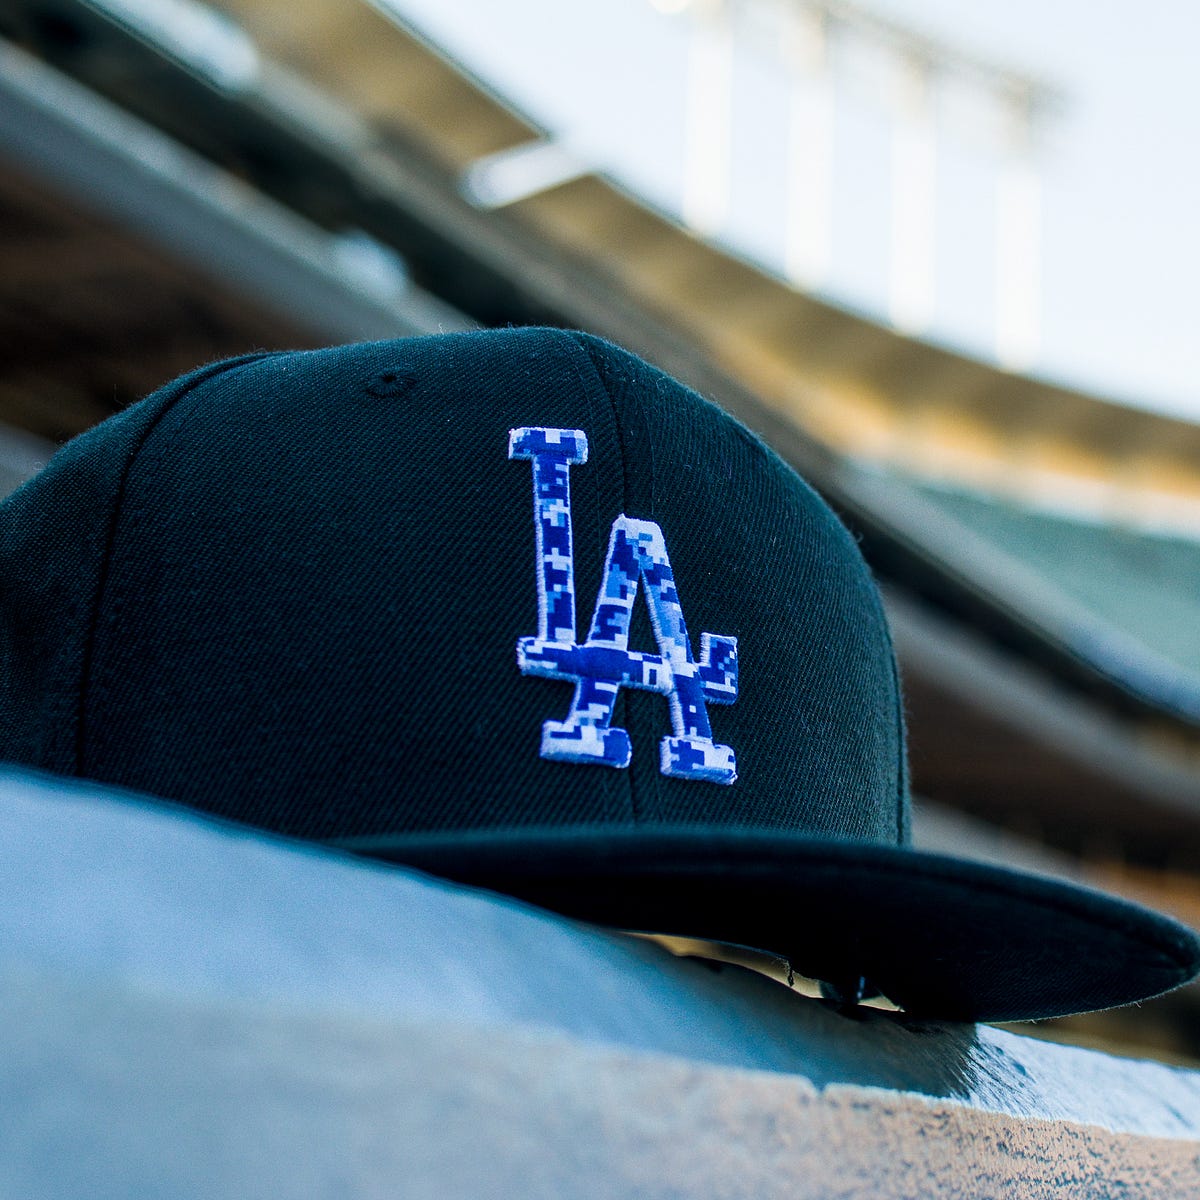 Dodgers announce 2019 promo schedule, by Rowan Kavner